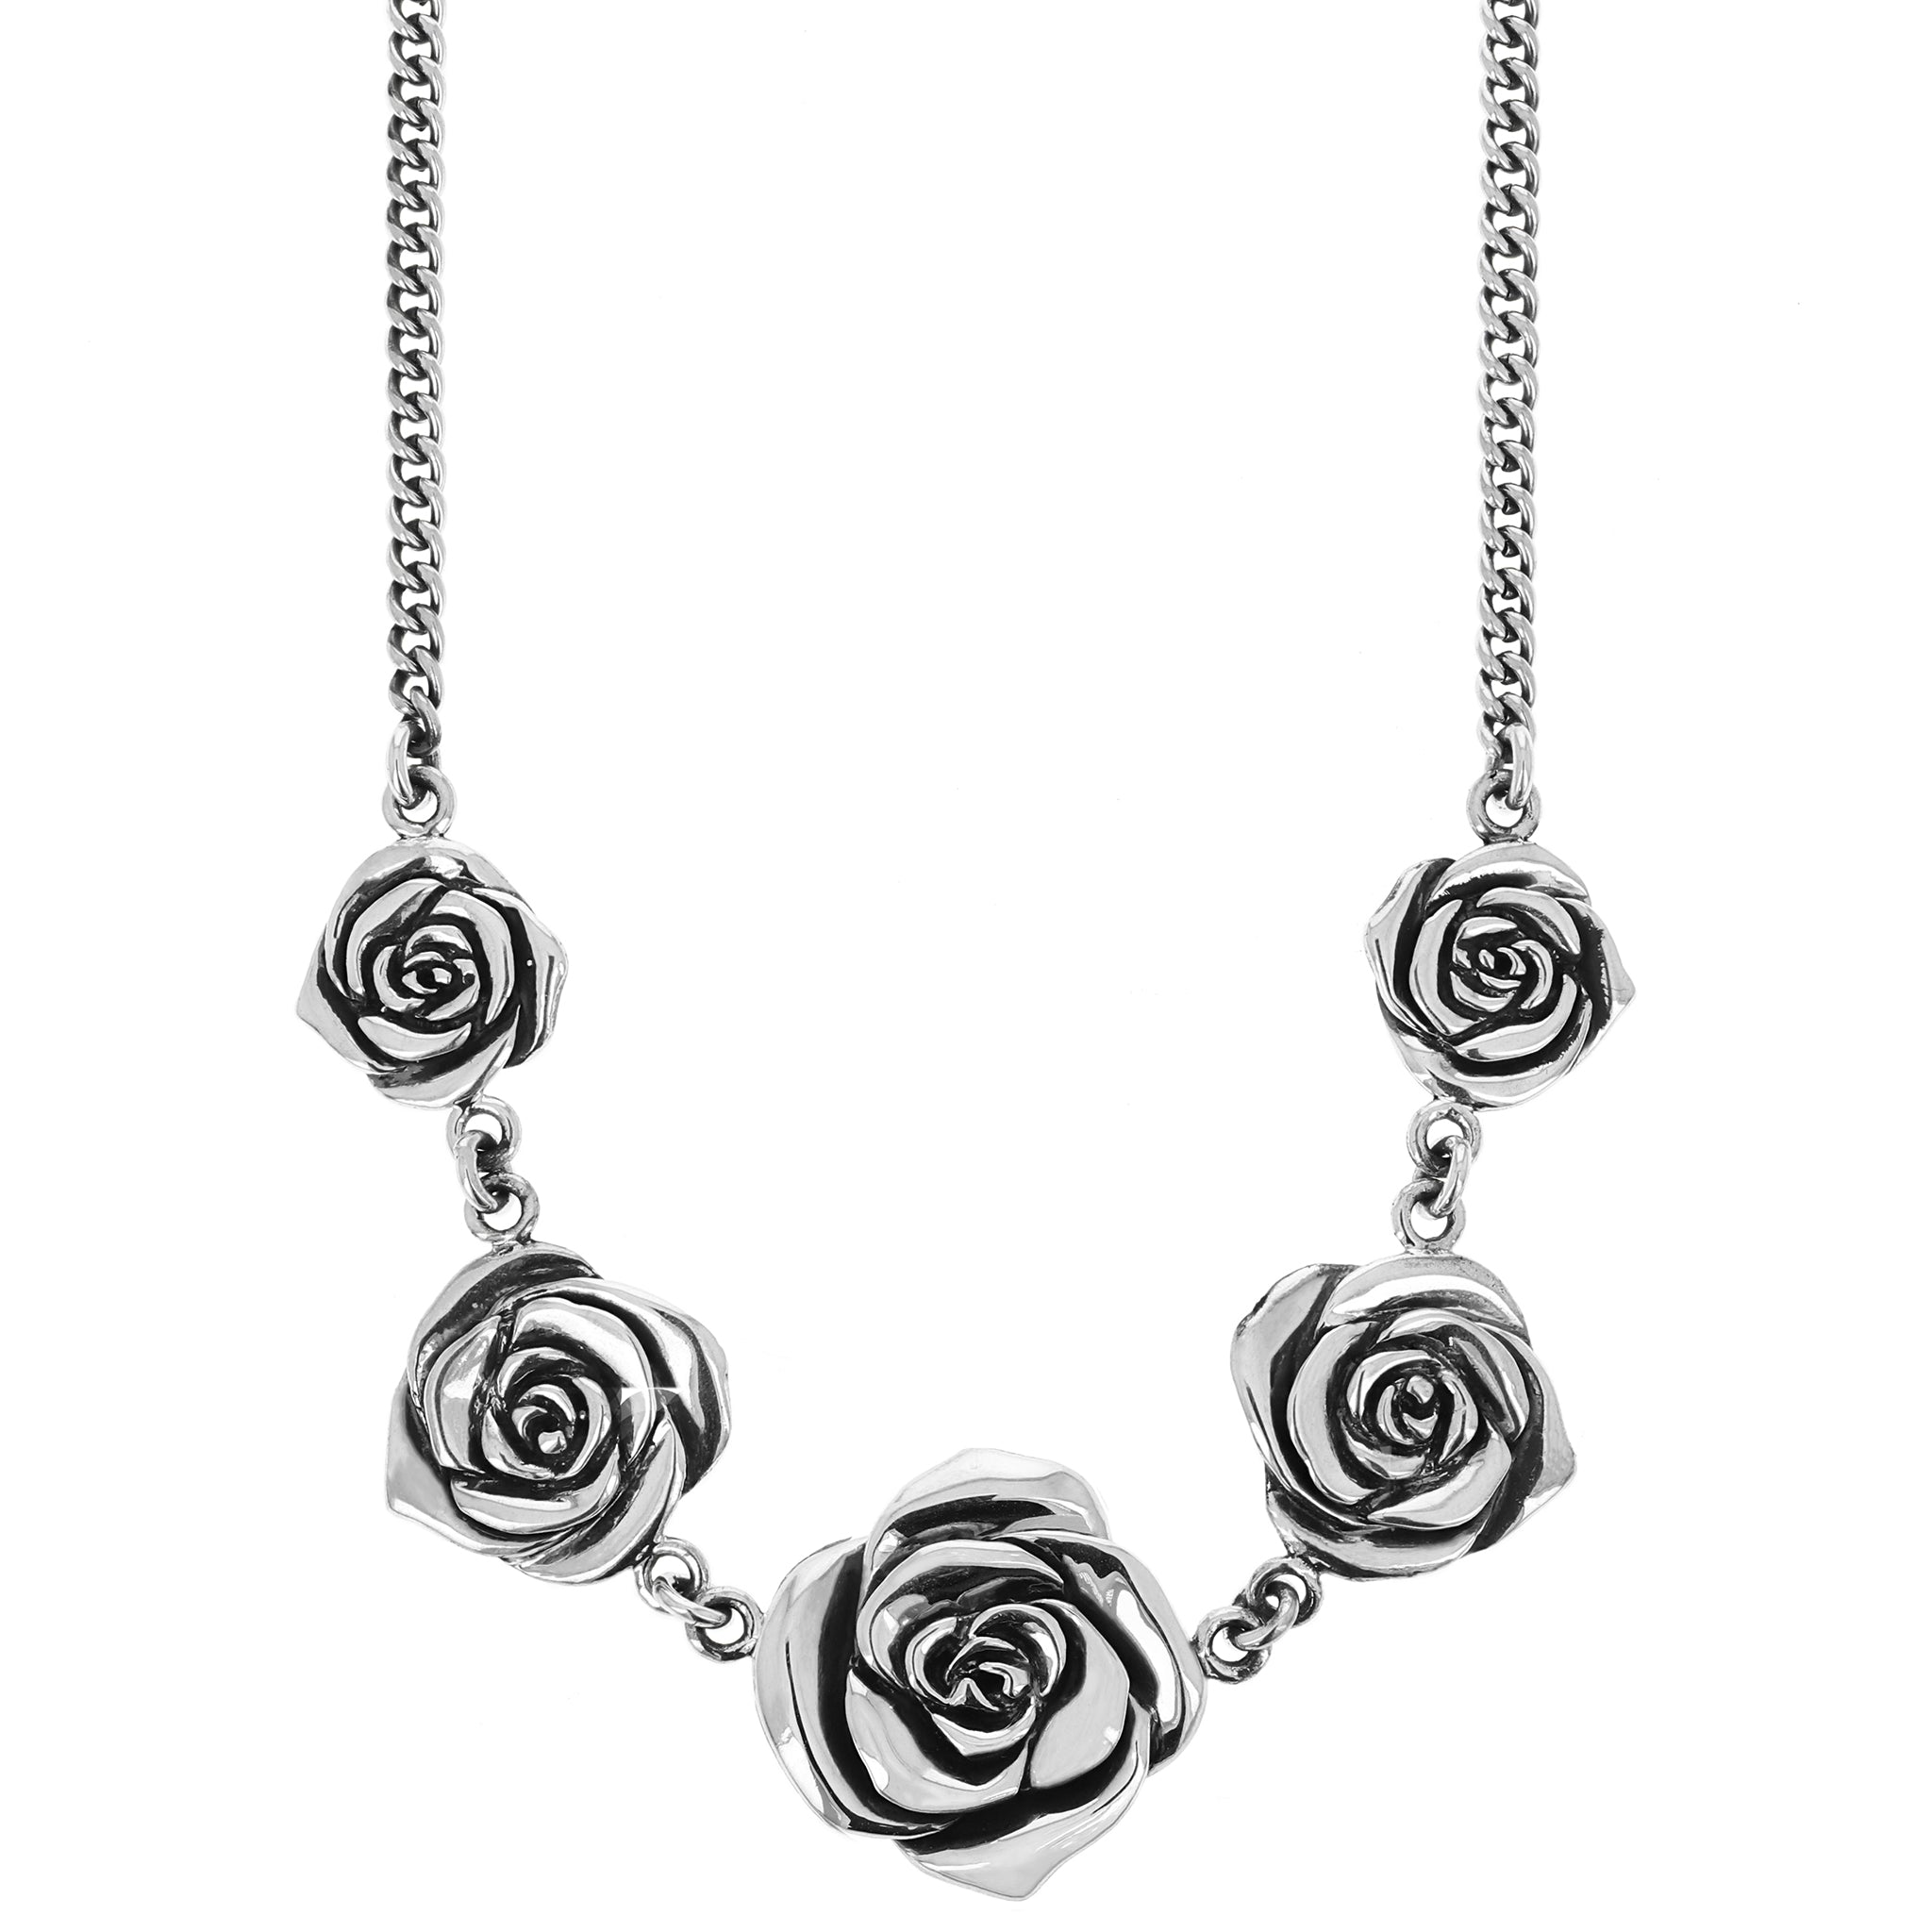 Rose in Heart jewelry settings for pearls